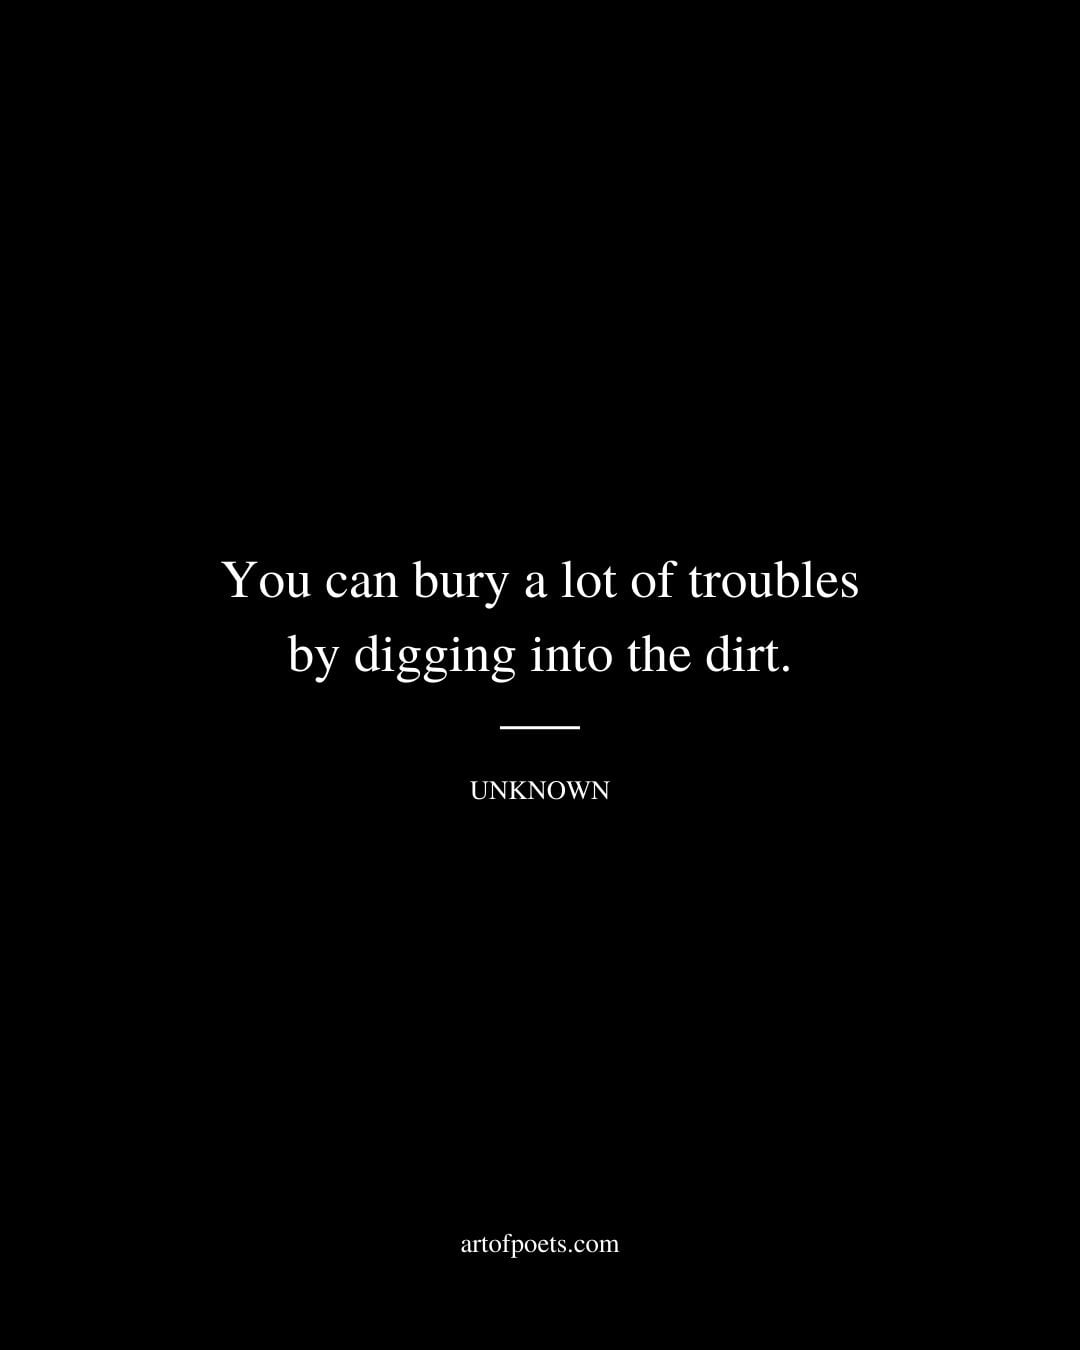 You can bury a lot of troubles by digging into the dirt. Author unknown